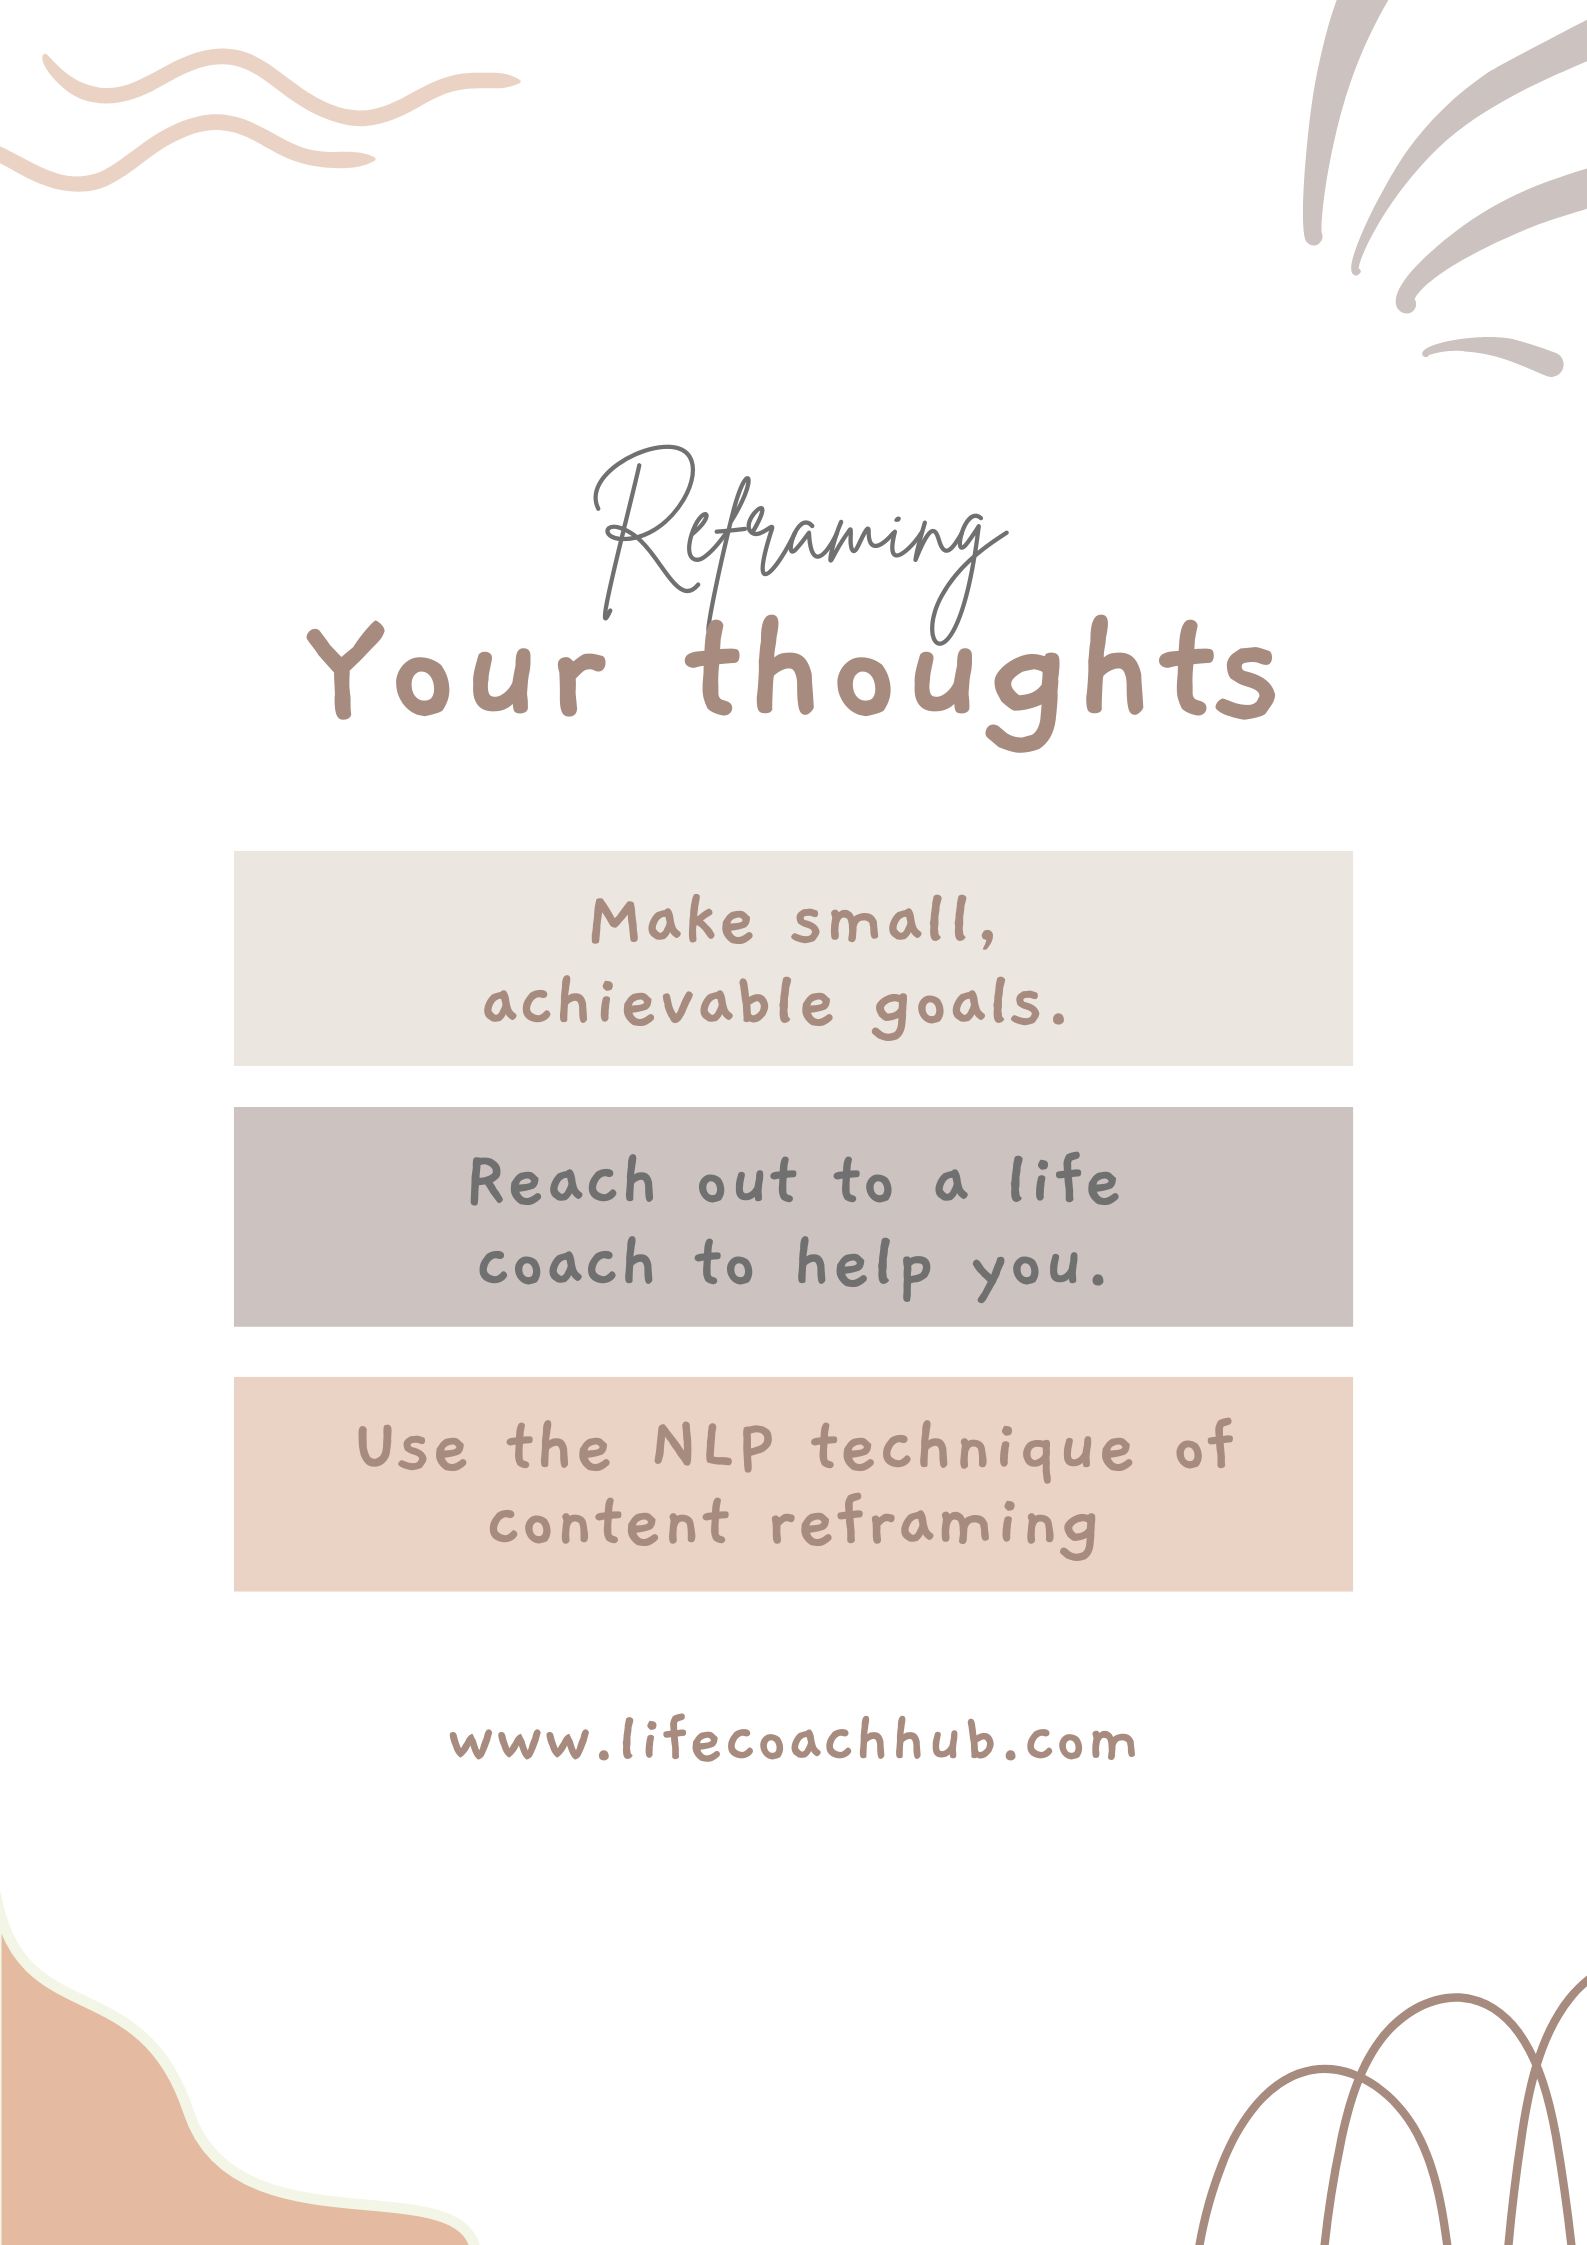 Reframing your thoughts, make small, achievable goals, reach out to a life coach, use the nL technique of content reframing, coaching tip